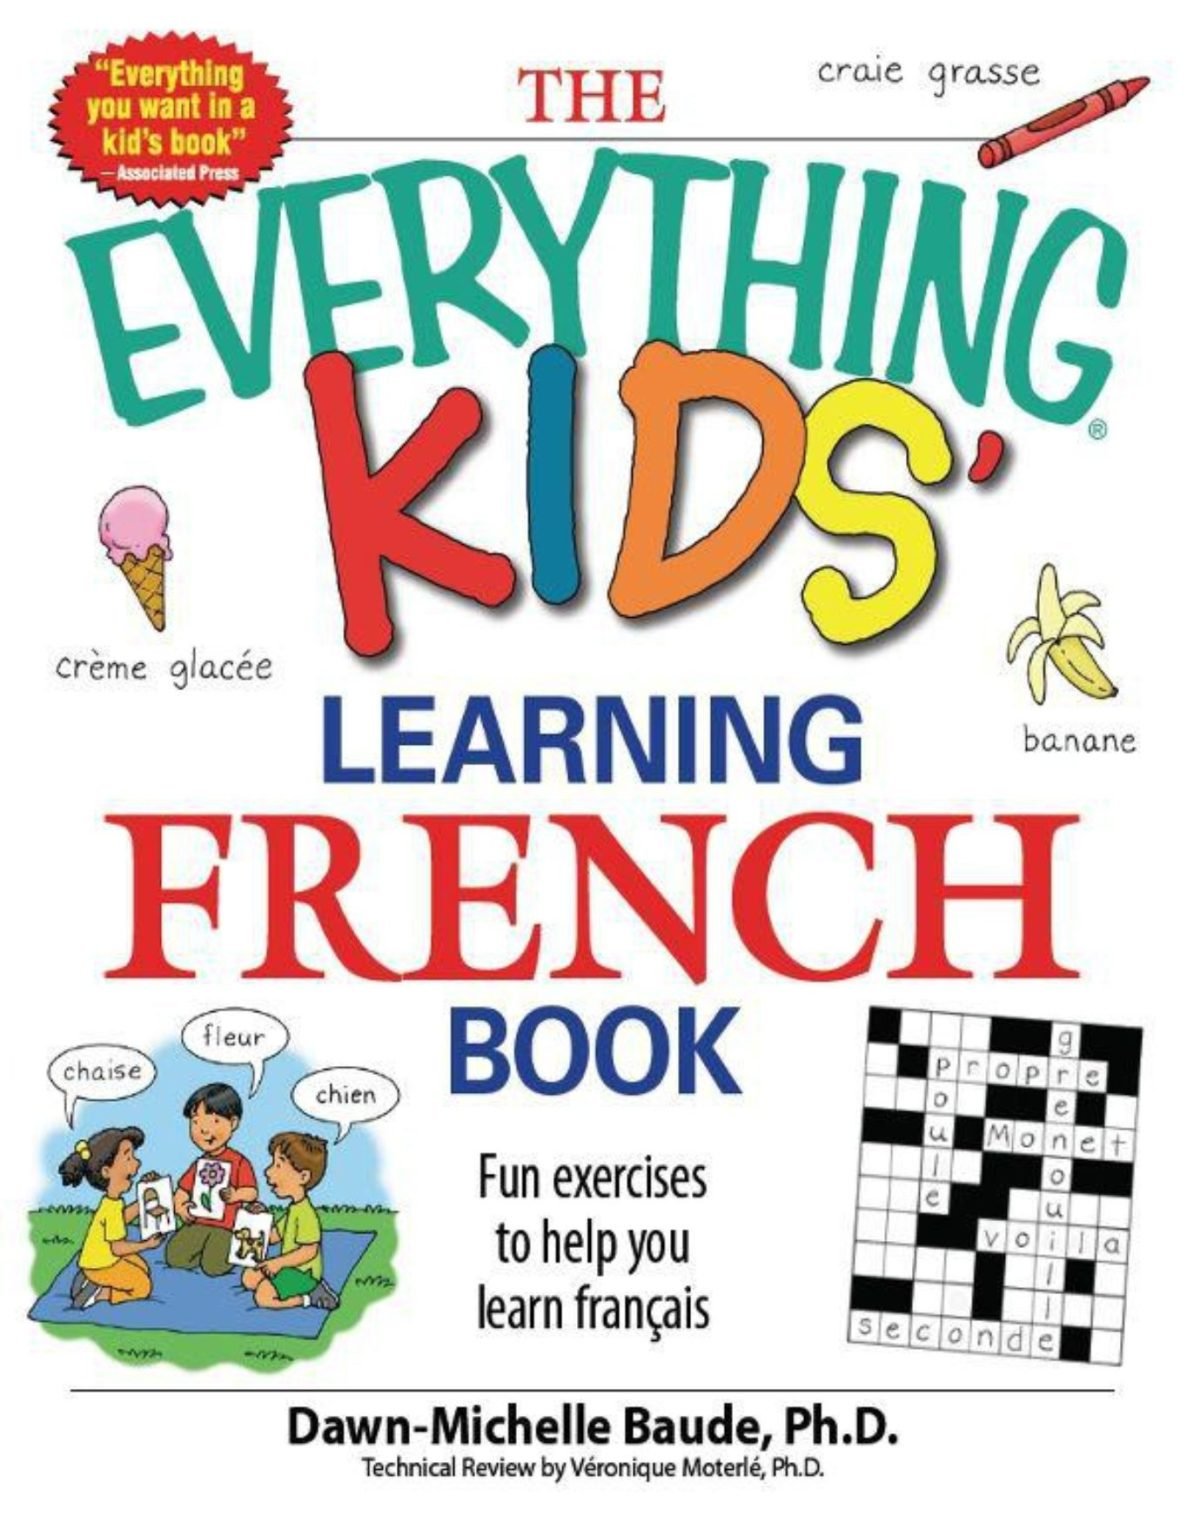 Rich results on Google's SERP when searching for ''Everything-Kids-Learning-French''